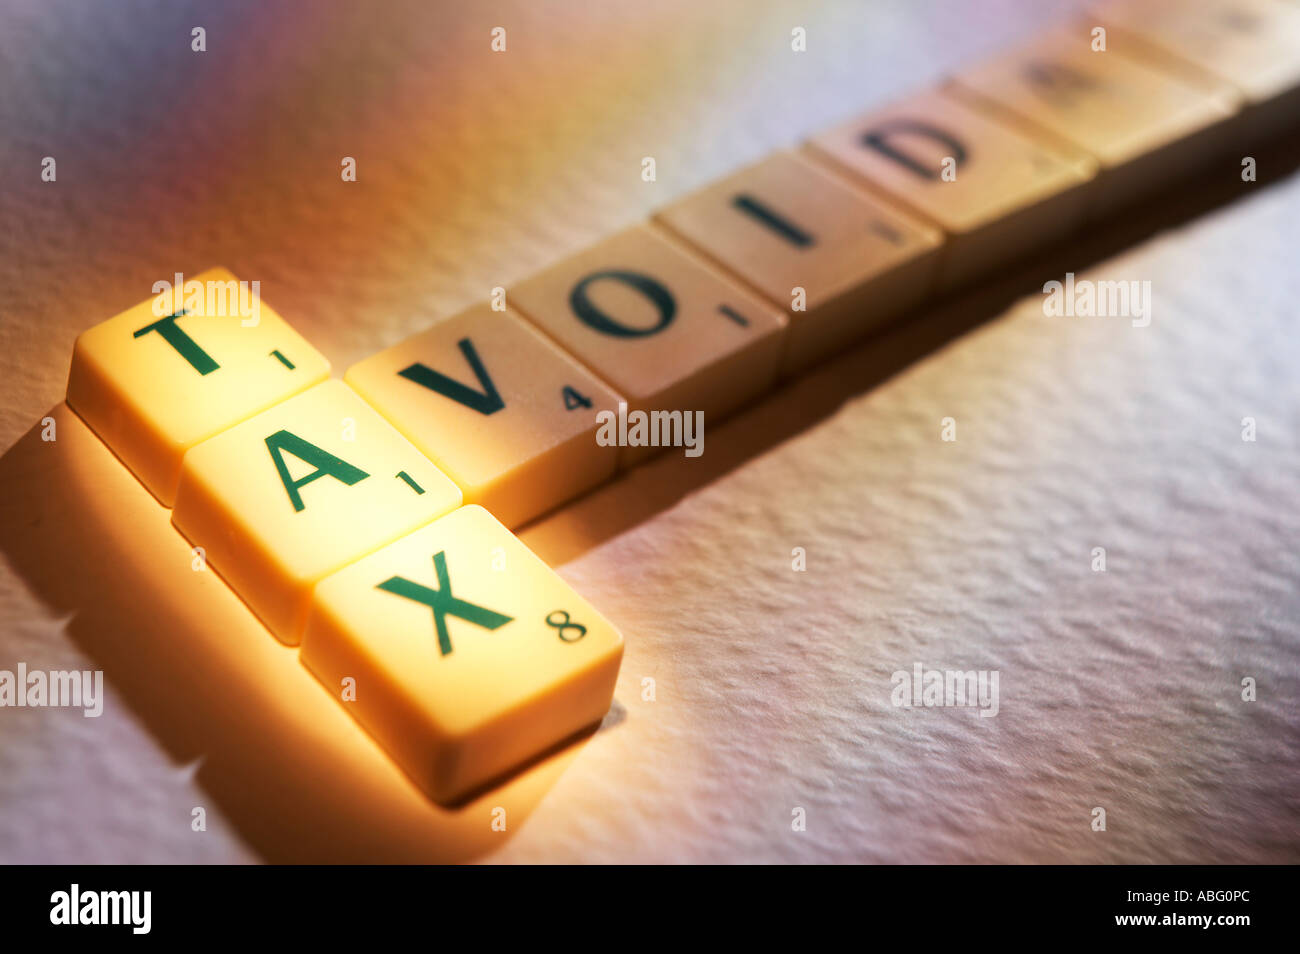 SCRABBLE BOARD GAME LETTERS SPELLING THE WORDS TAX AVOIDANCE Stock Photo